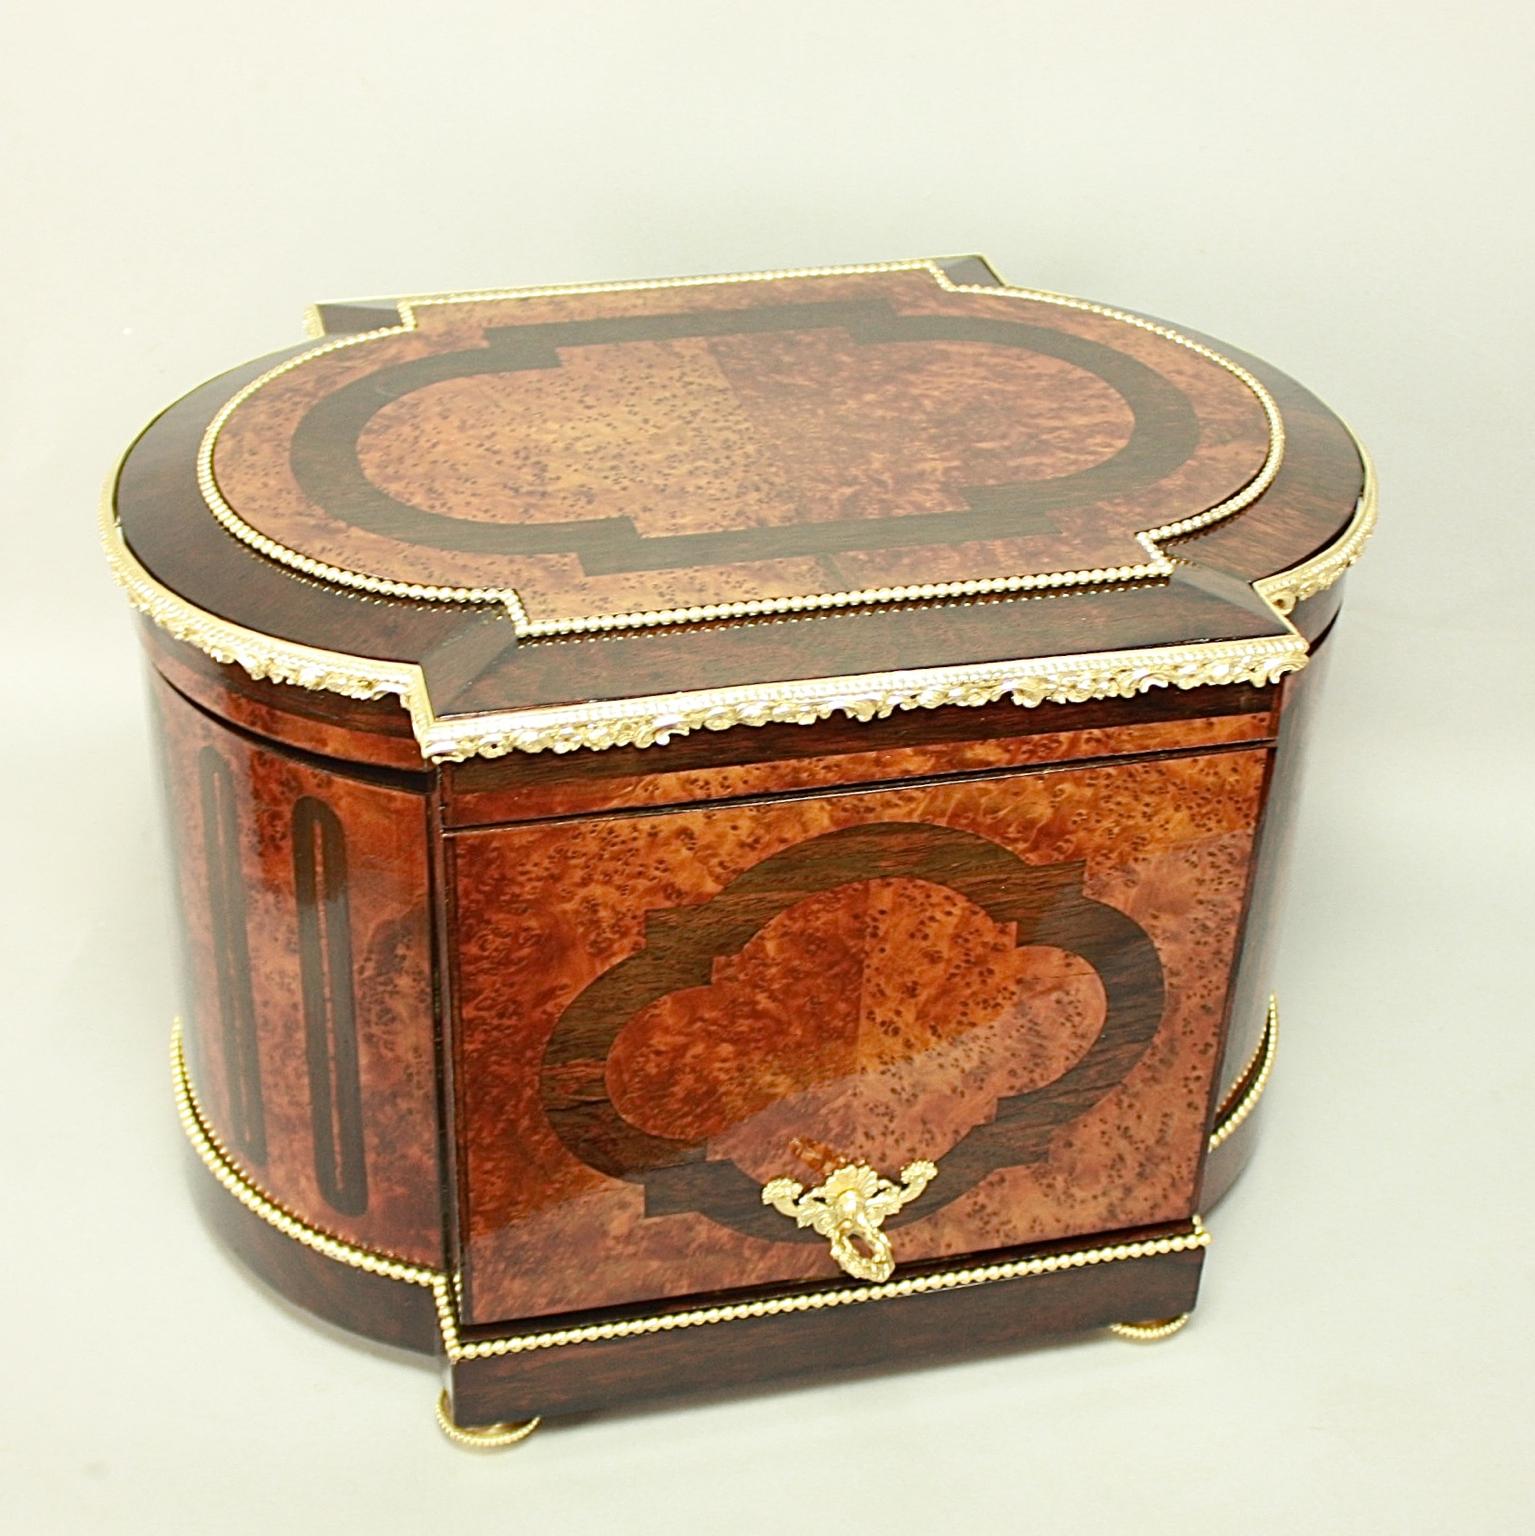 19th Century French Louis XVI Gilt Bronze and Bird's-Eye Maple Tantalus or Liquor Caddy

Excellent Louis XVI style marquetry tantalus, manufactured circa 1860, bearing the original label of Maison Hennon Bernassau à Nîmes: oblong in shape with a